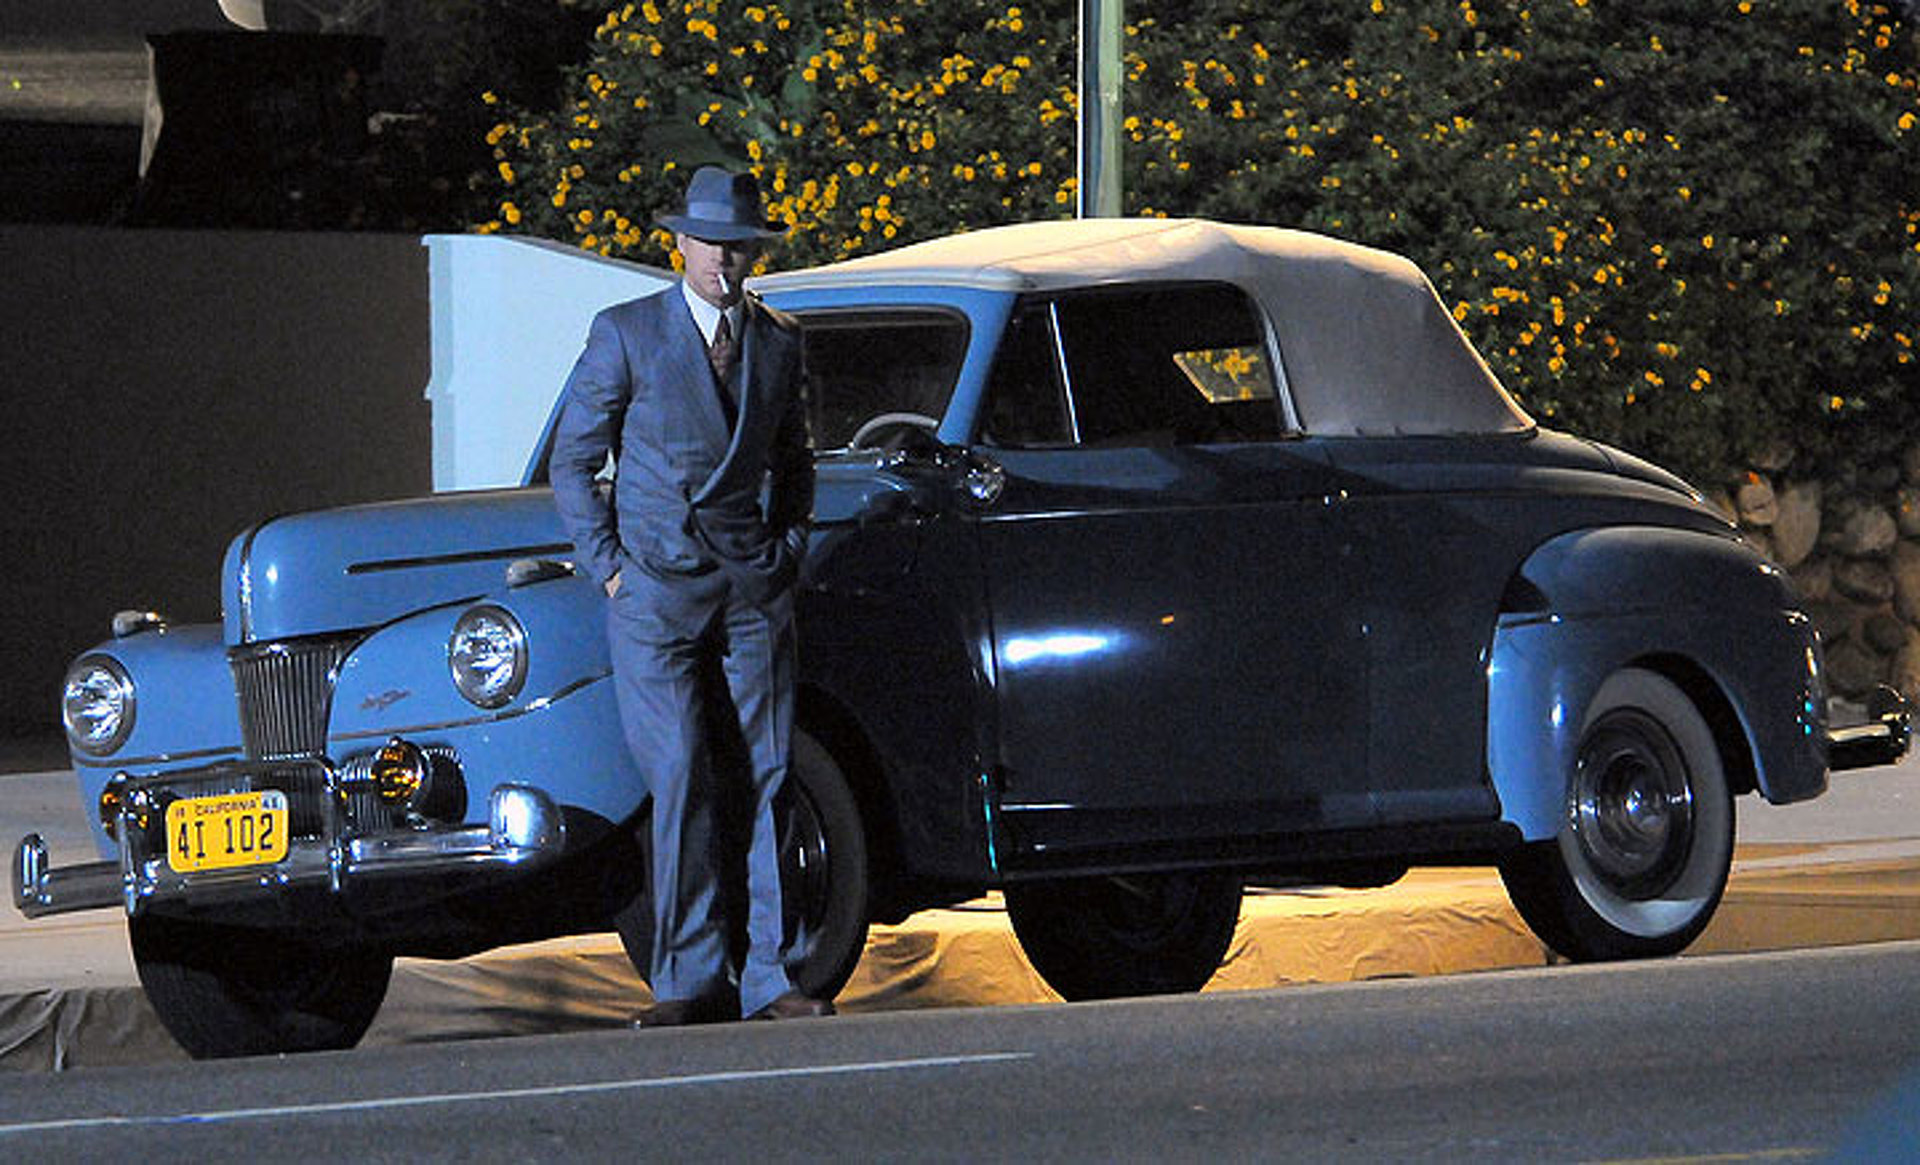 You Can Buy Ryan Gosling's Ford from “Gangster Squad”